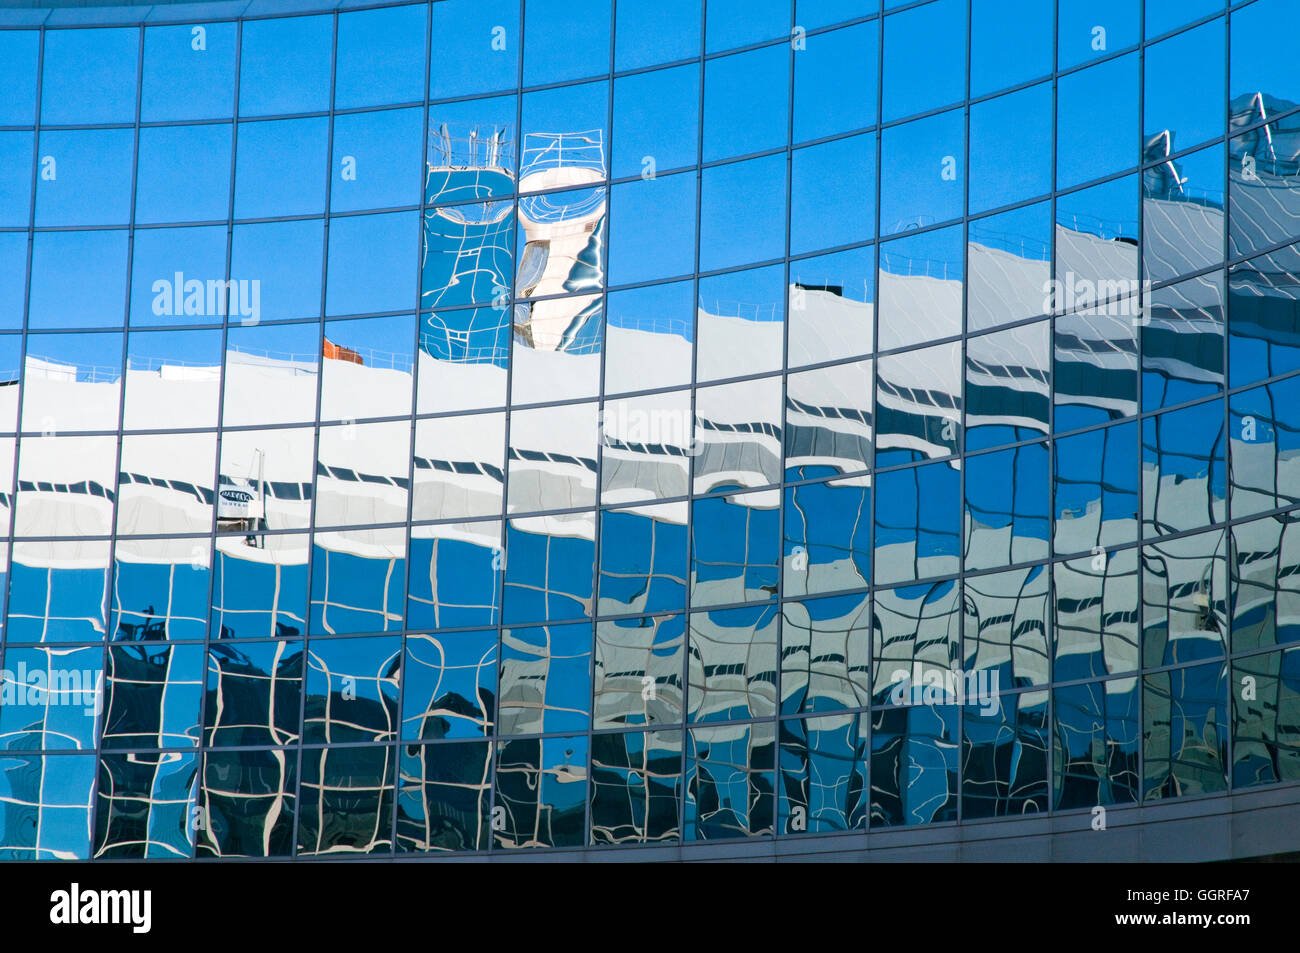 Reflections on glass facade. Background. Stock Photo